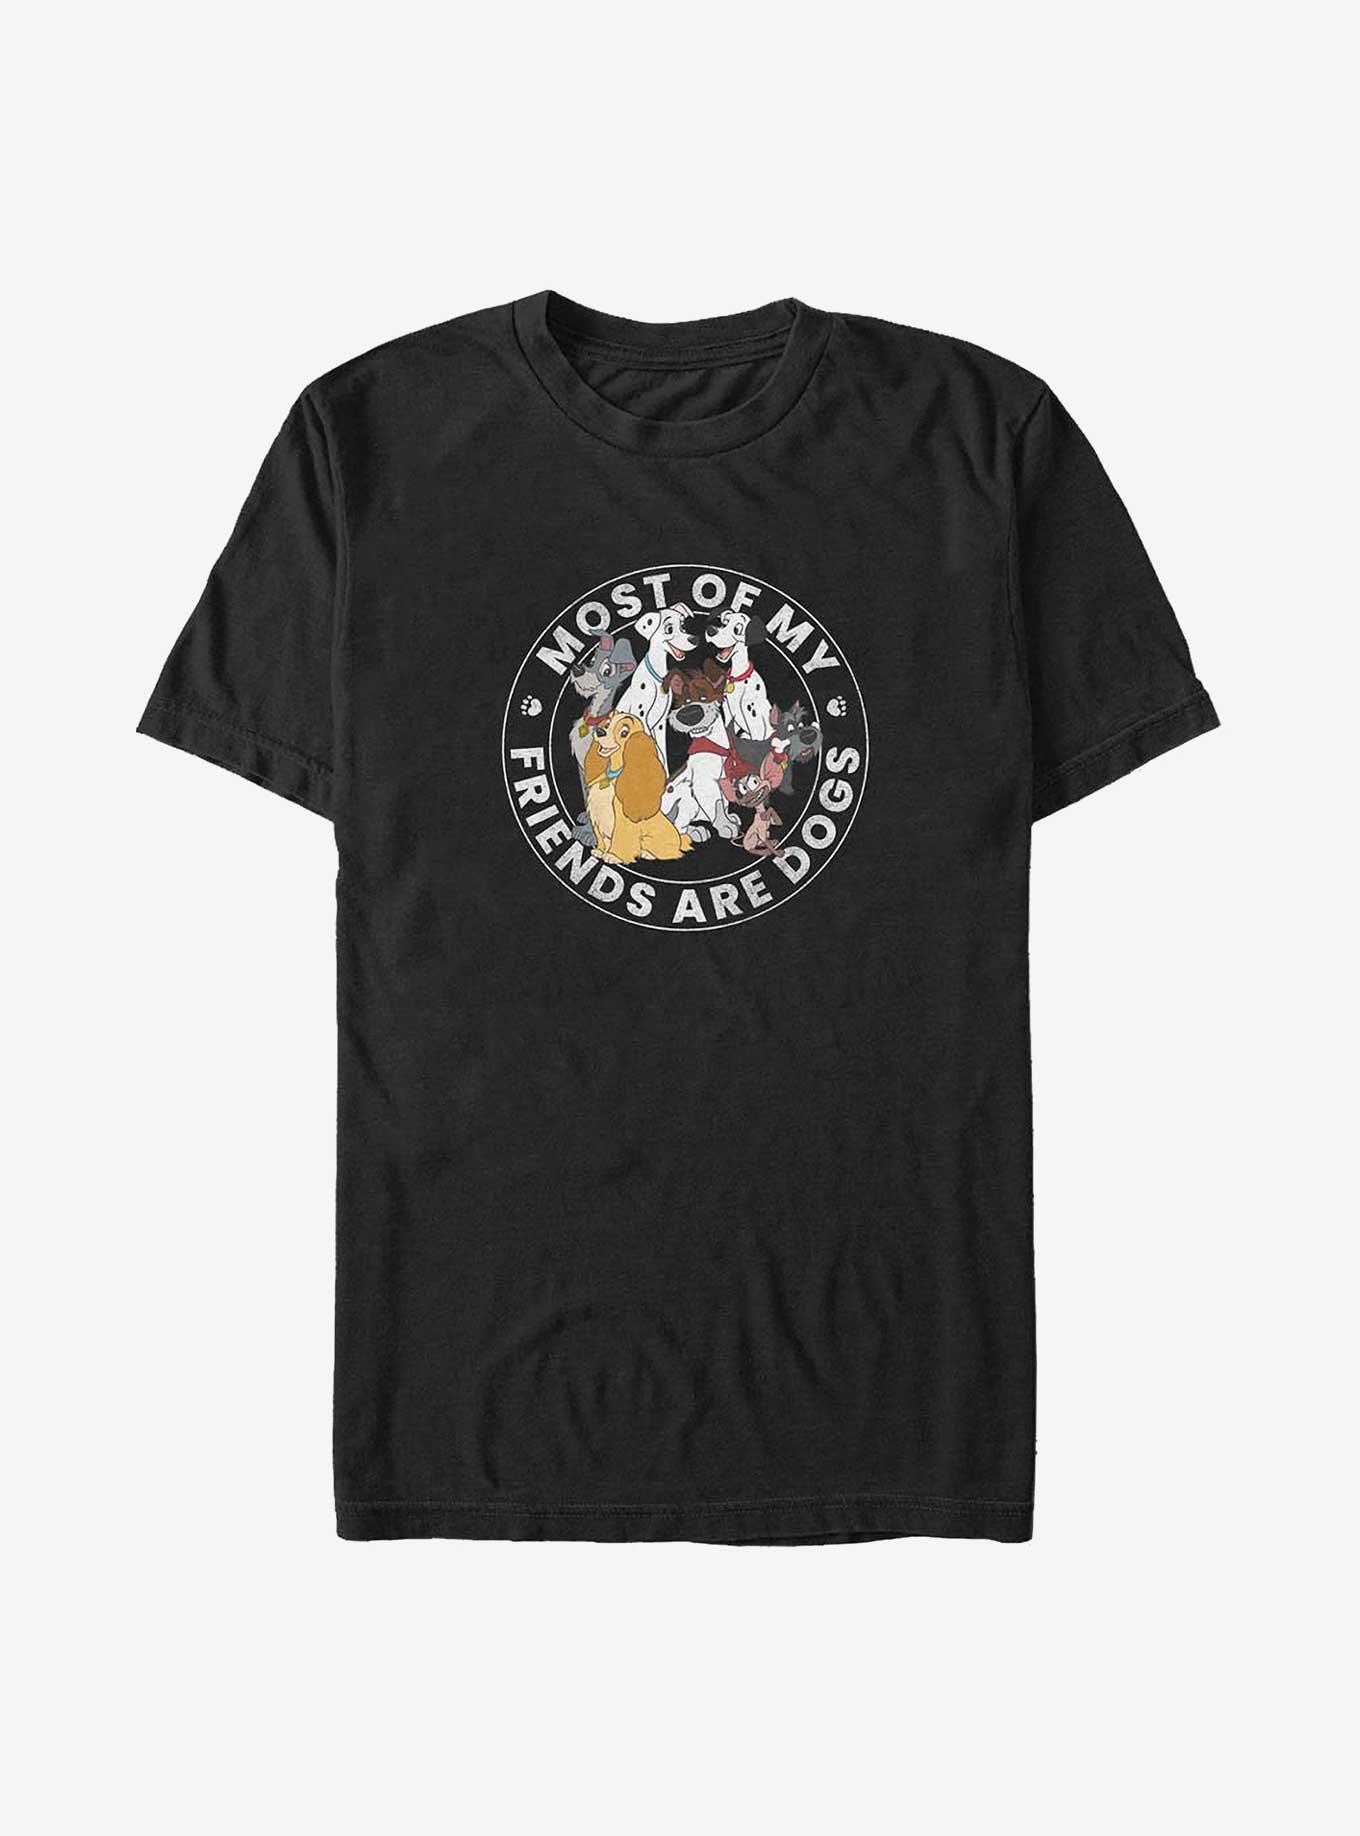 Disney Channel Most of My Friends Are Dogs Big & Tall T-Shirt